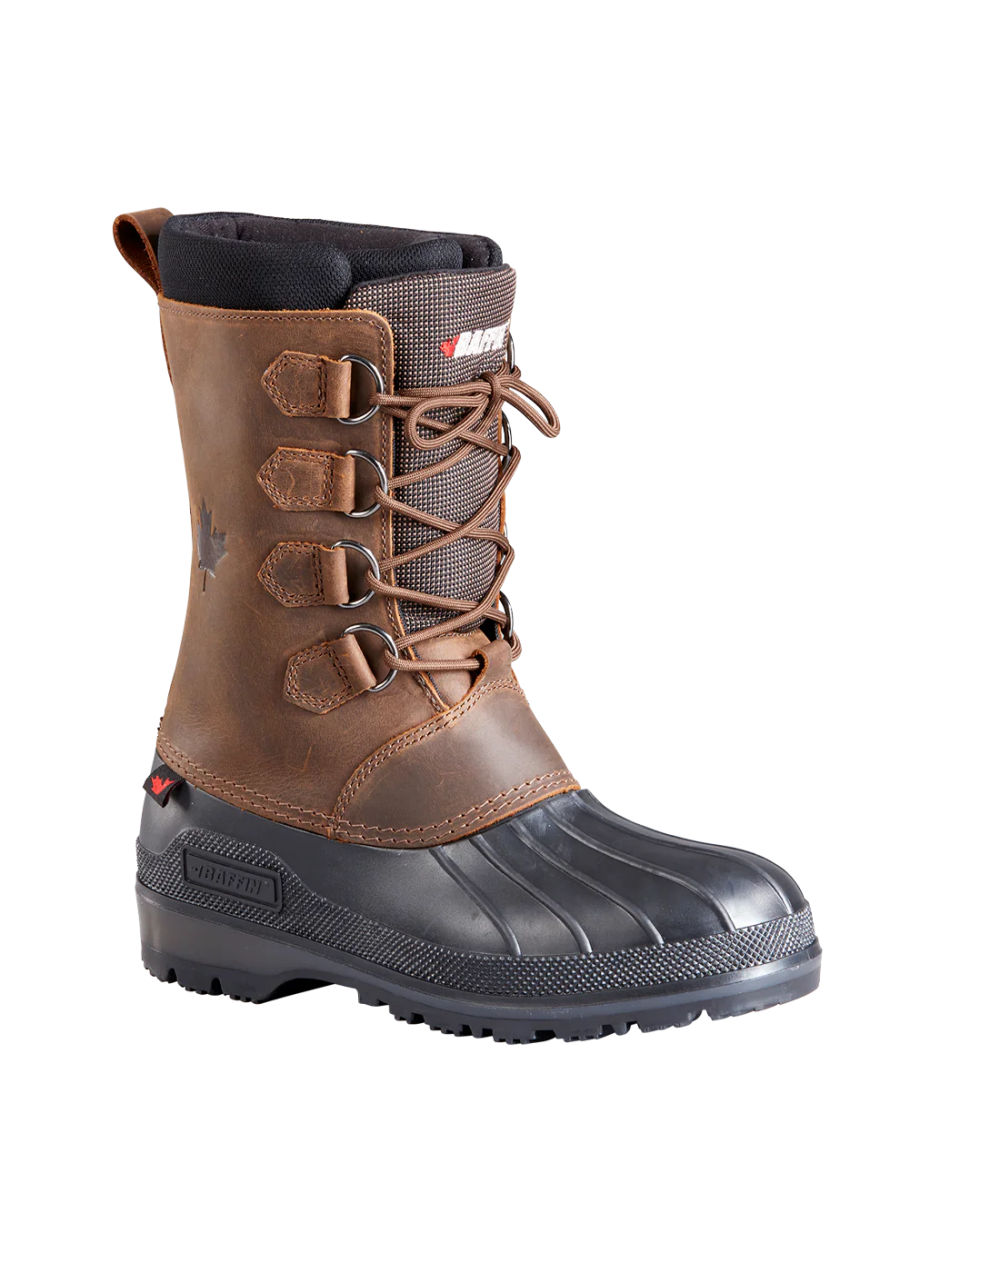 CAMBRIAN | WOMEN'S WINTER BOOTS-BROWN